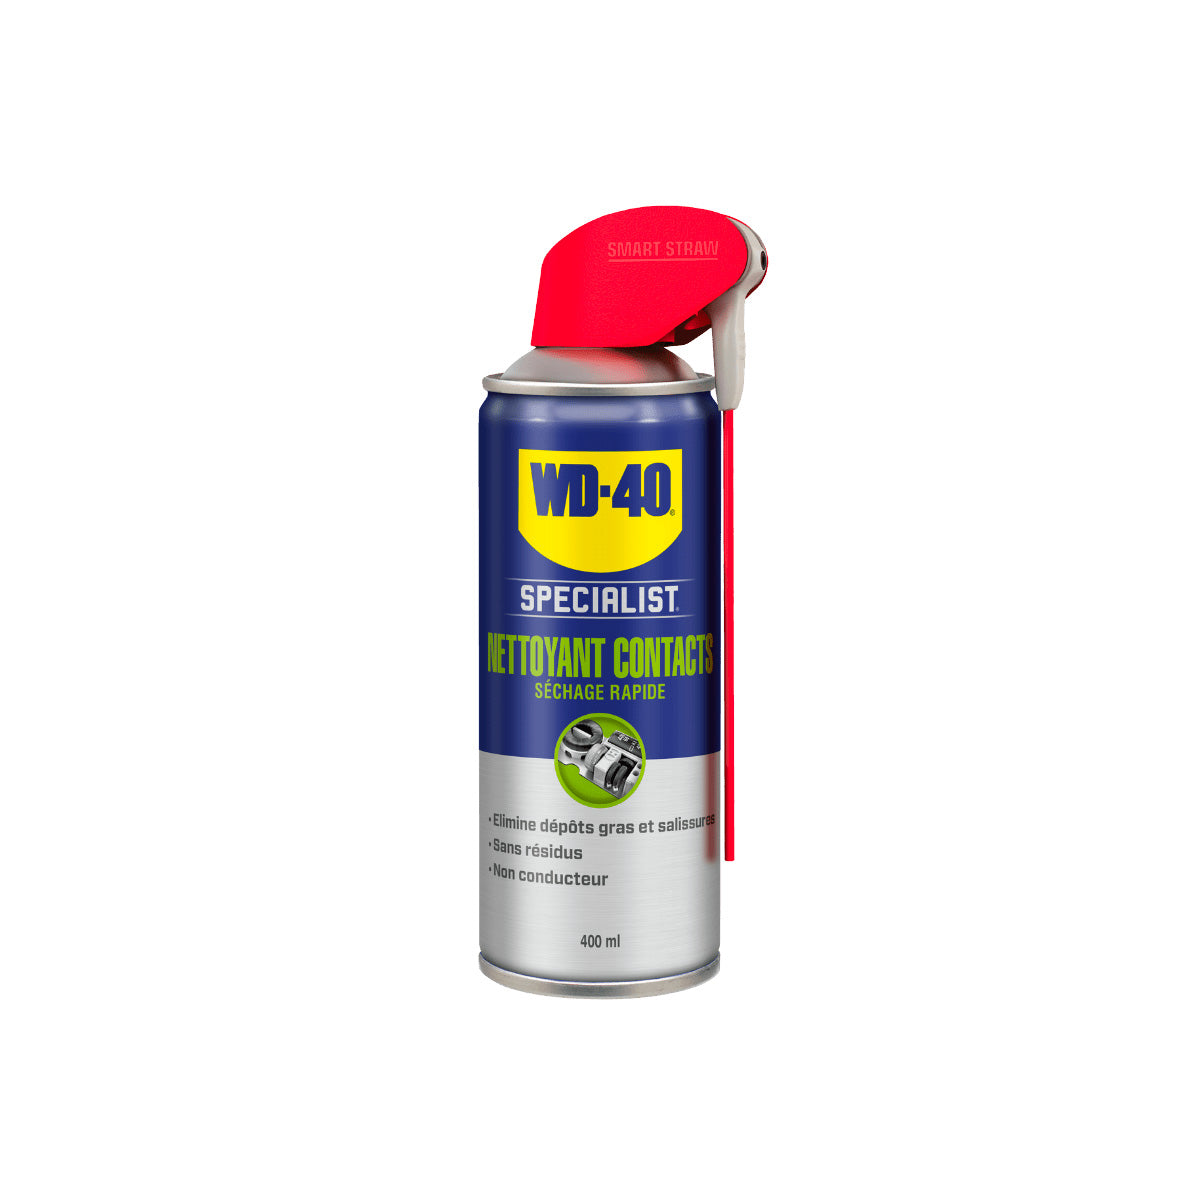 NETTOYANT CONTACT - WD40